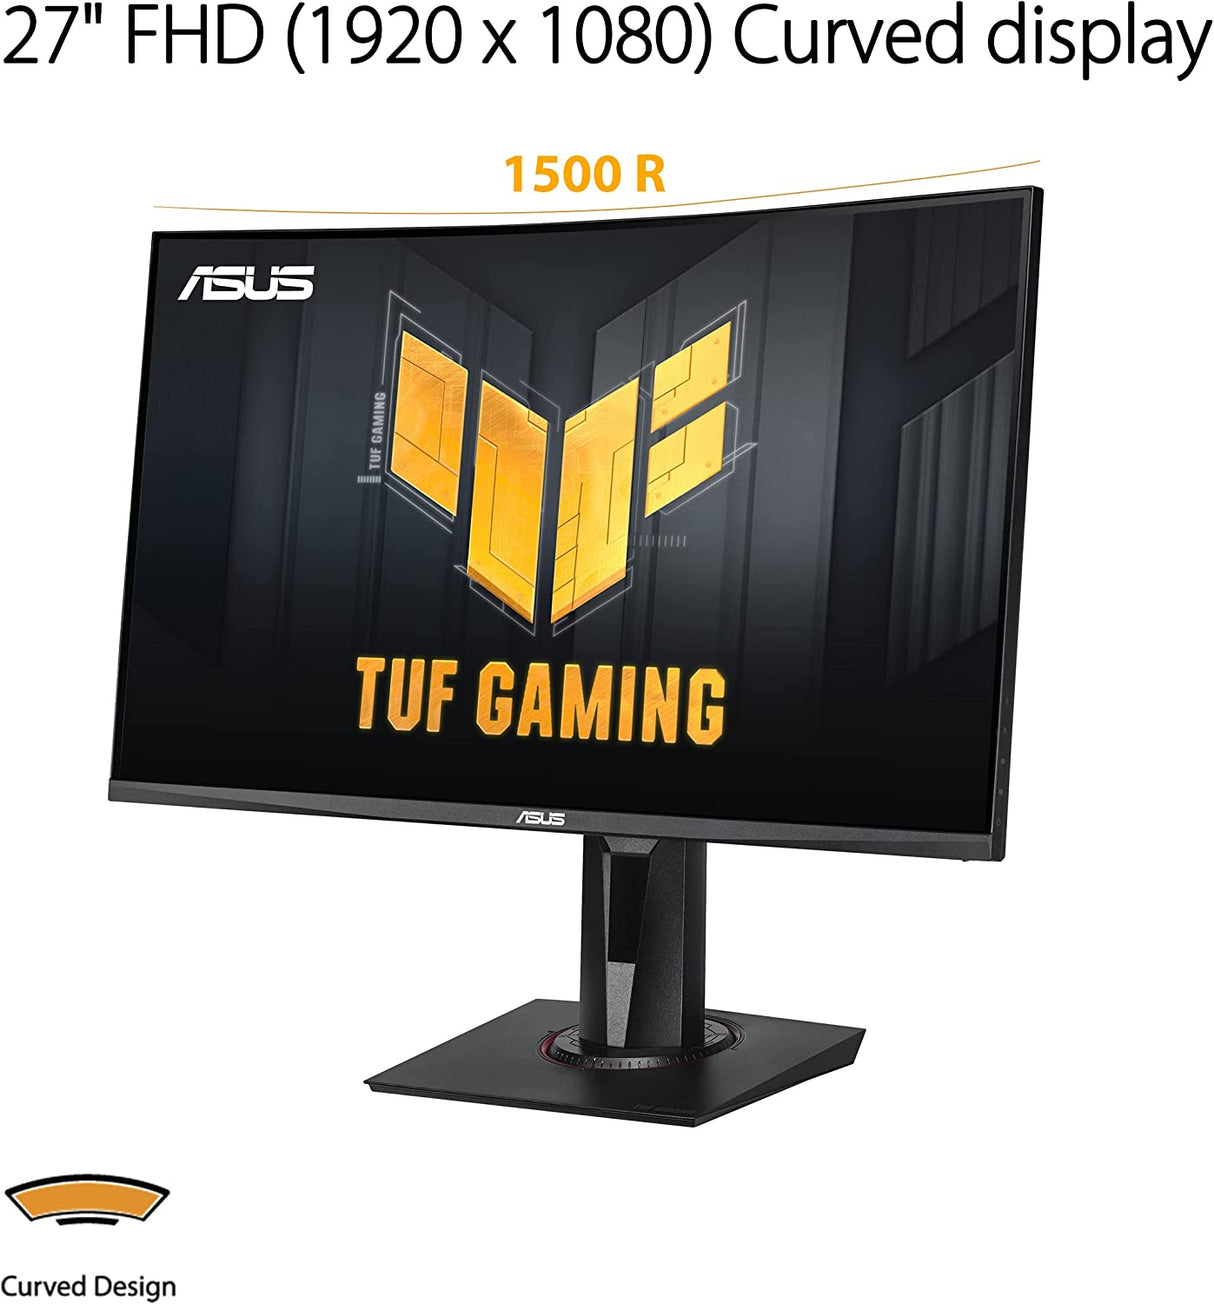 ASUS 27” 1080P TUF Gaming Curved HDR Monitor (VG27VQM) - Full HD, 240Hz, 1ms, Extreme Low Motion Blur, Adaptive-Sync, Freesync™ Premium, Speakers, Eye Care, HDMI, DisplayPort, USB, Height Adjustable